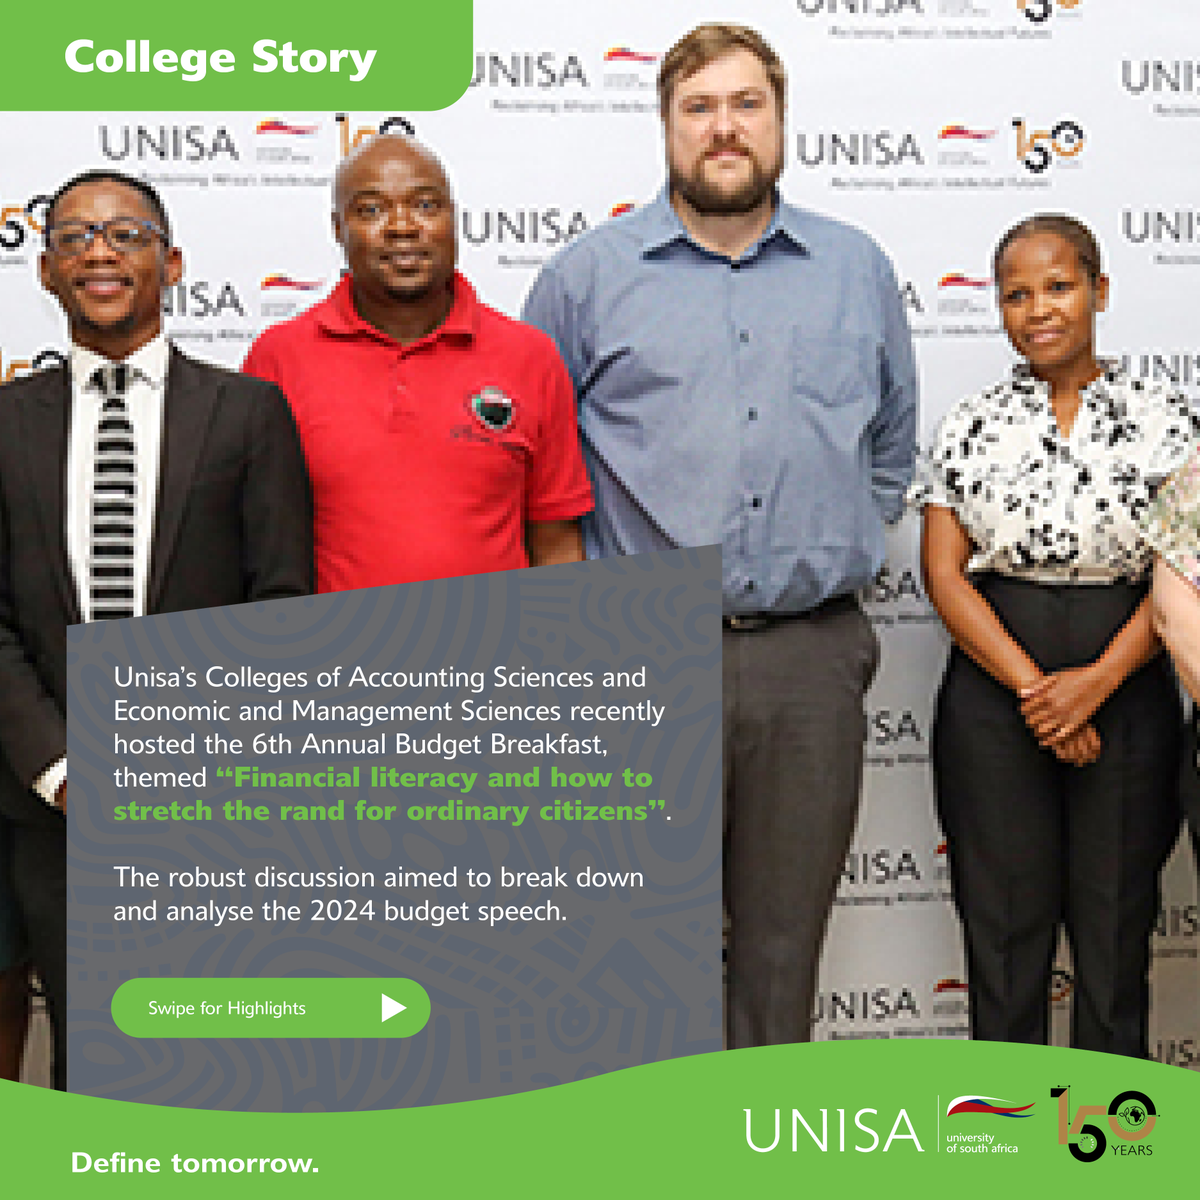 UNISA's Colleges of Accounting Sciences and Economic and Management Sciences sparked important discussions at the 6th Annual Budget Breakfast, addressing critical topics such as financial sustainability, inequality, and tax capacity. ow.ly/lqpg50Rbcgo